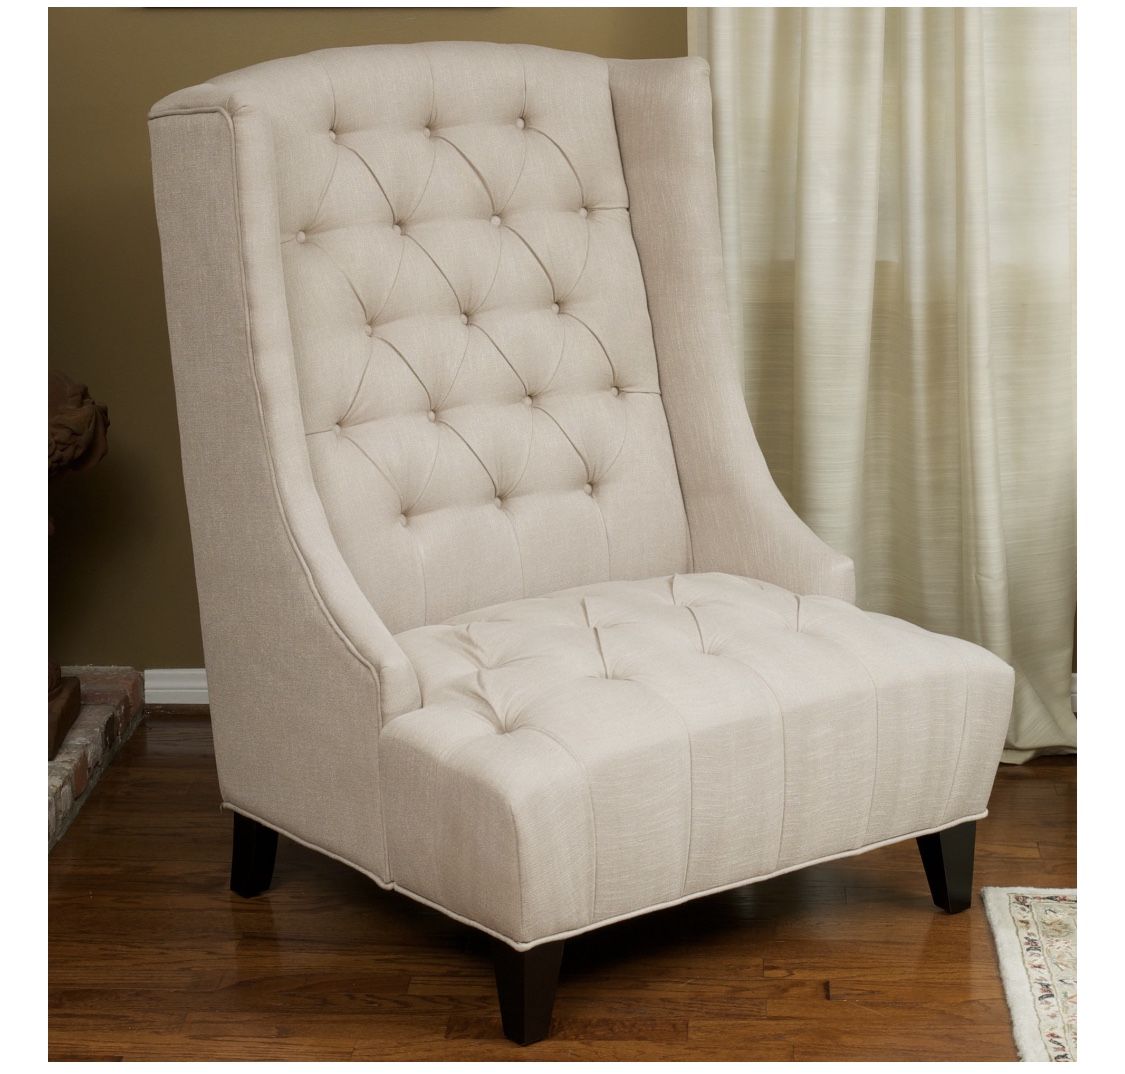 Two Large  Living Accent Chairs $320